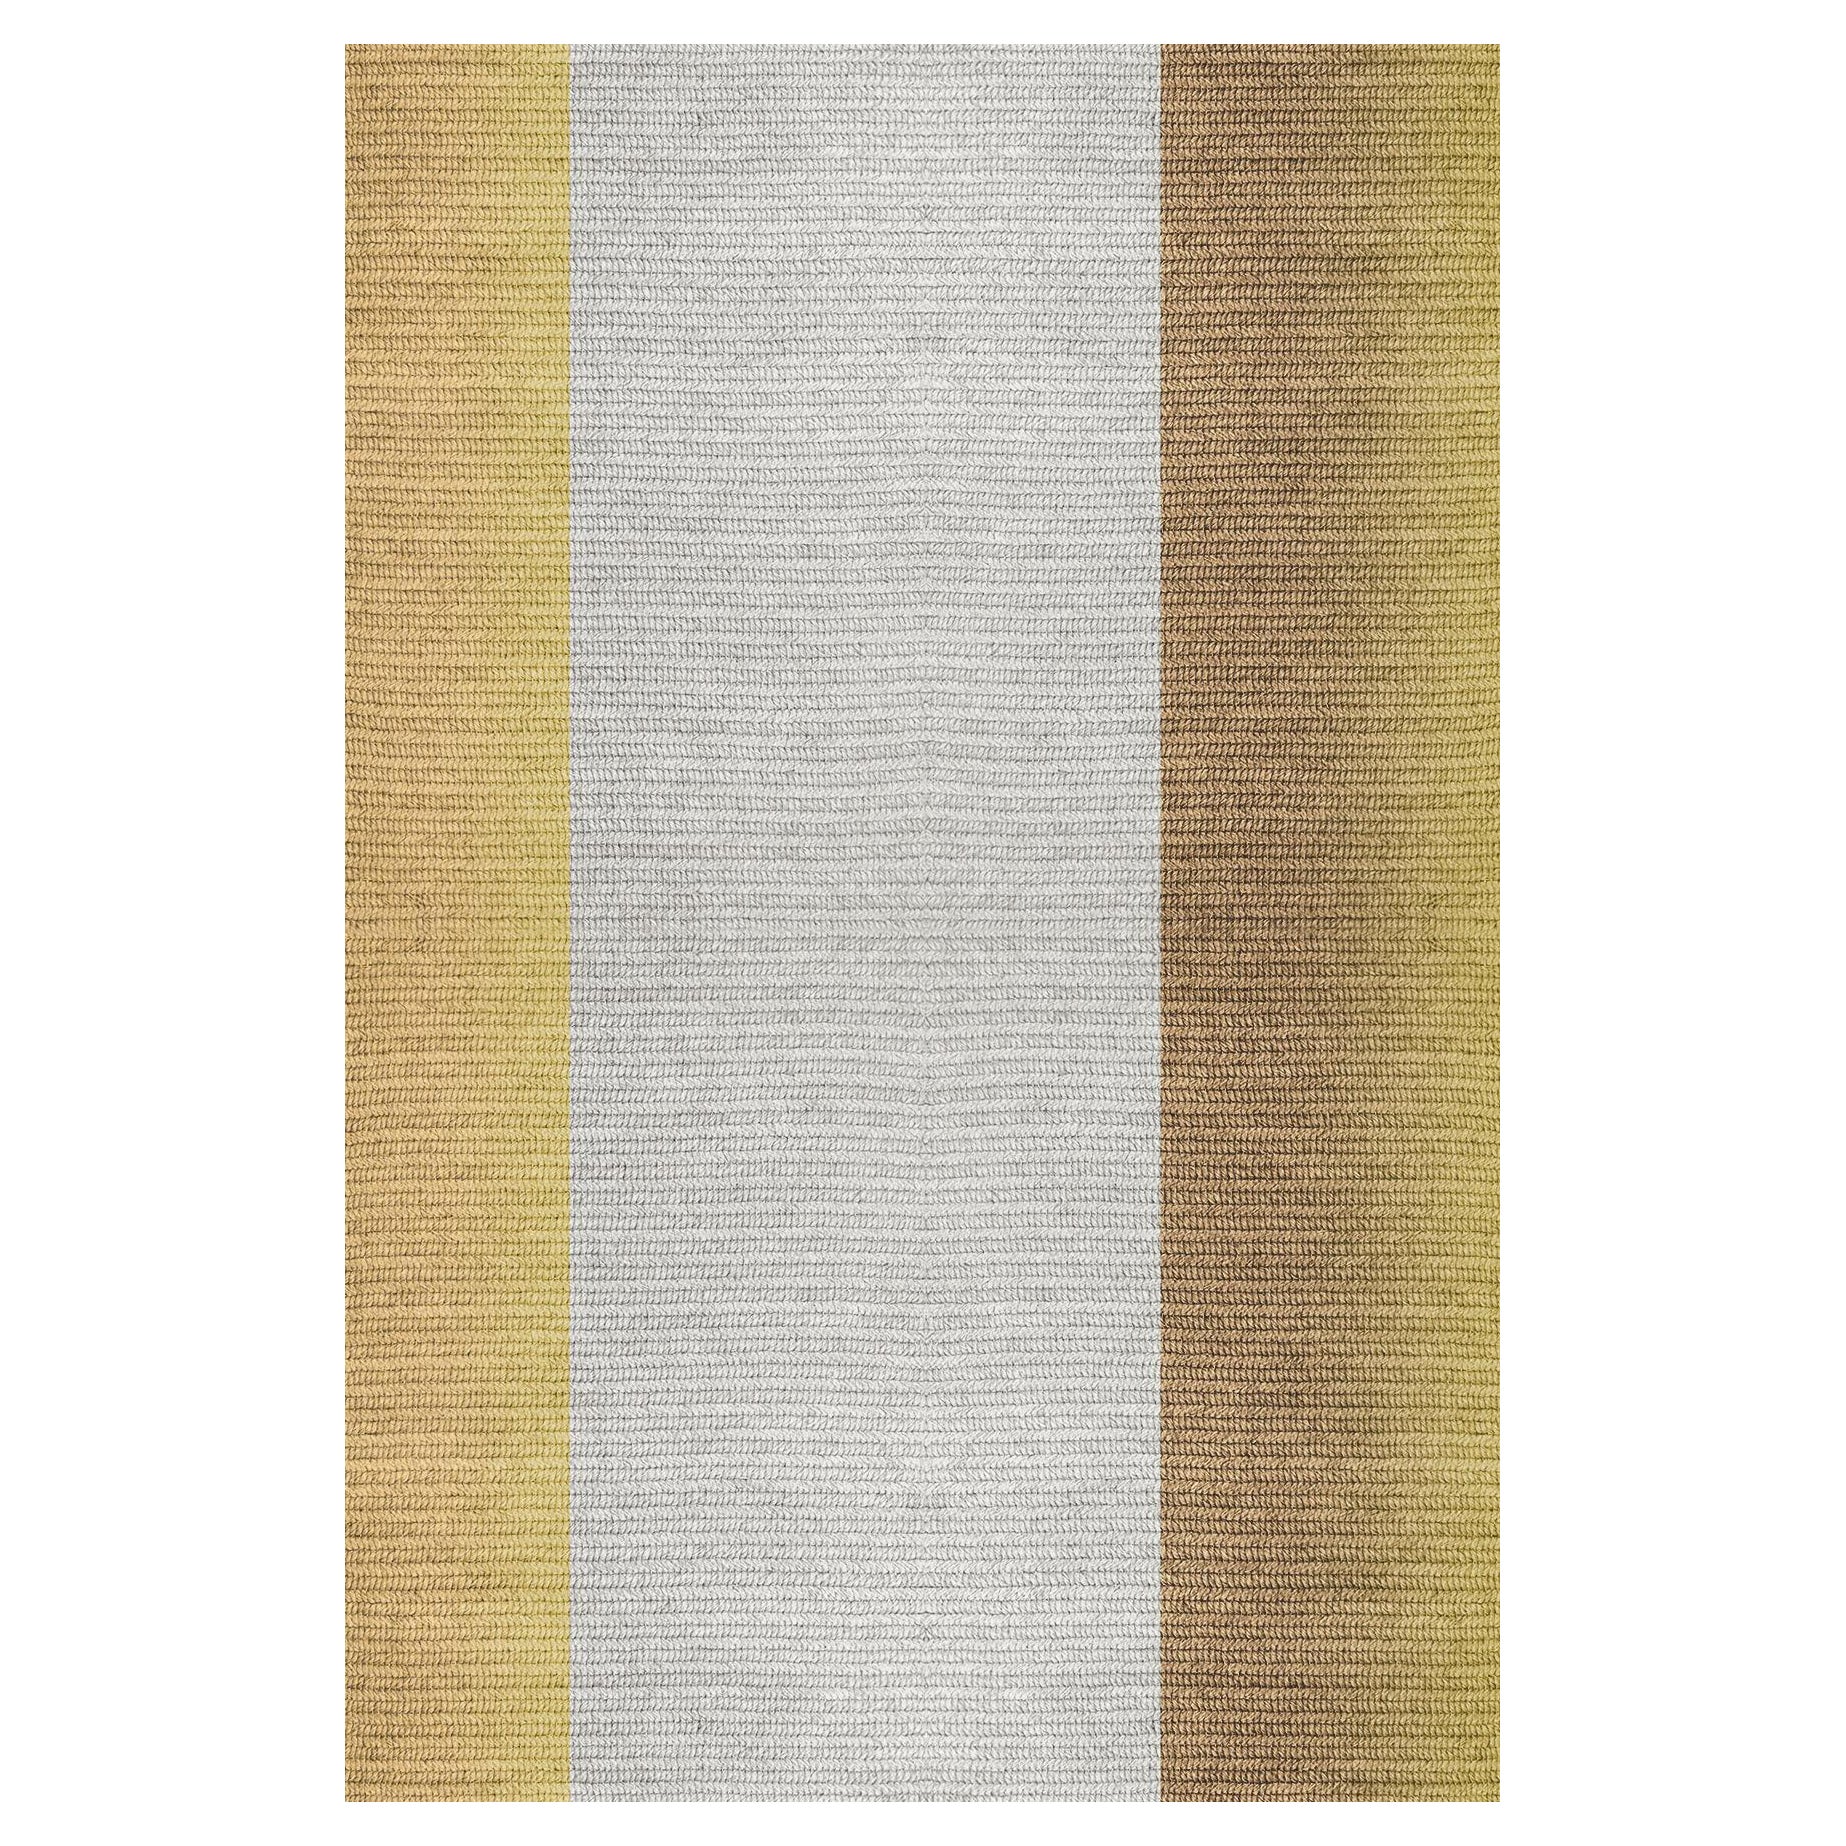 'Blur' Rug in Abaca, Color 'Pampas', by Claire Vos for Musett Design